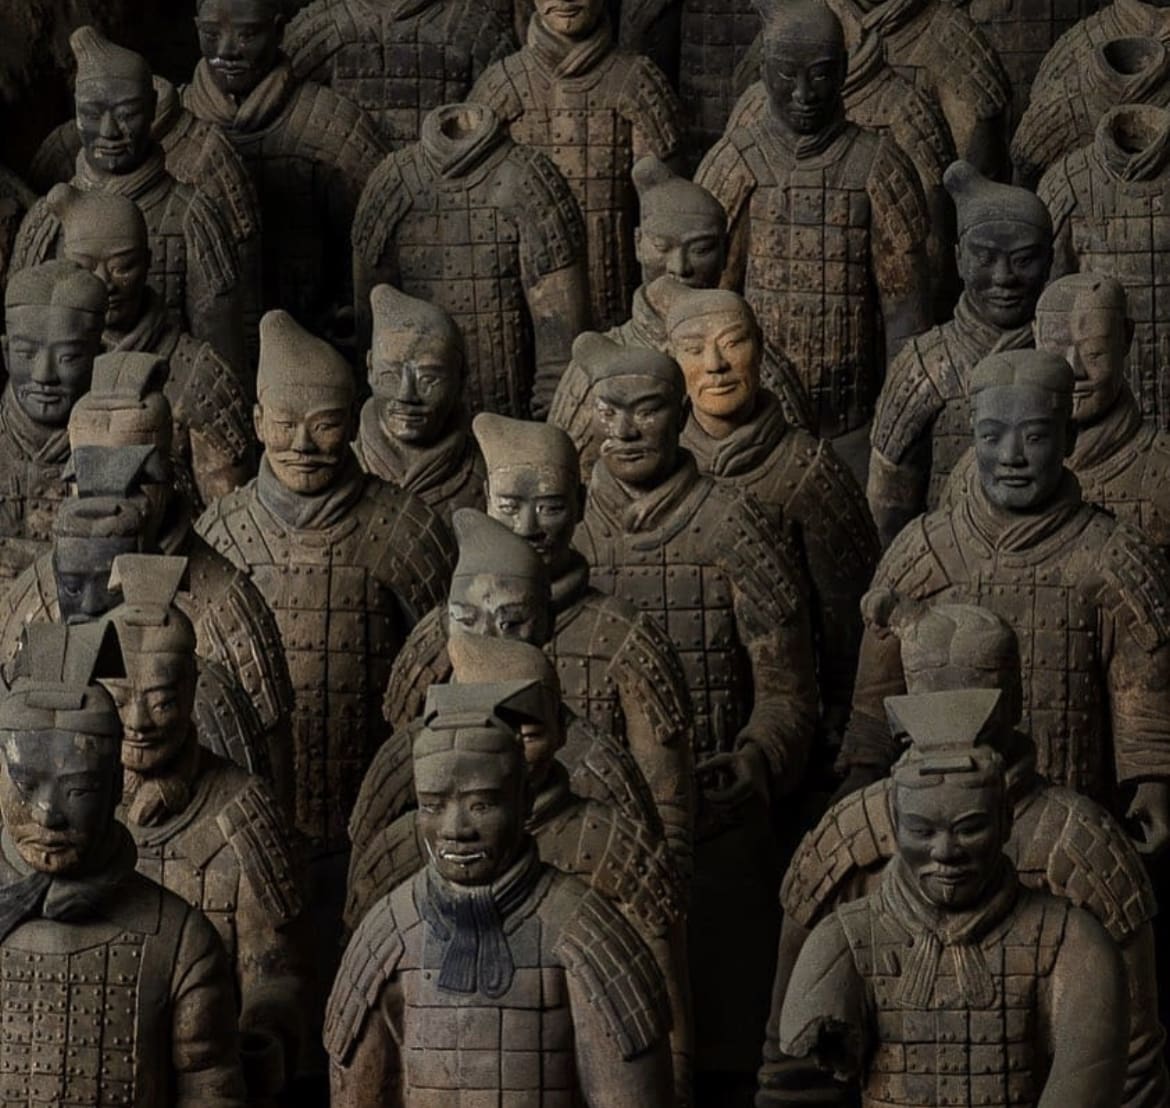 Under the light and shadows, you can see how different each individual terracotta warrior is